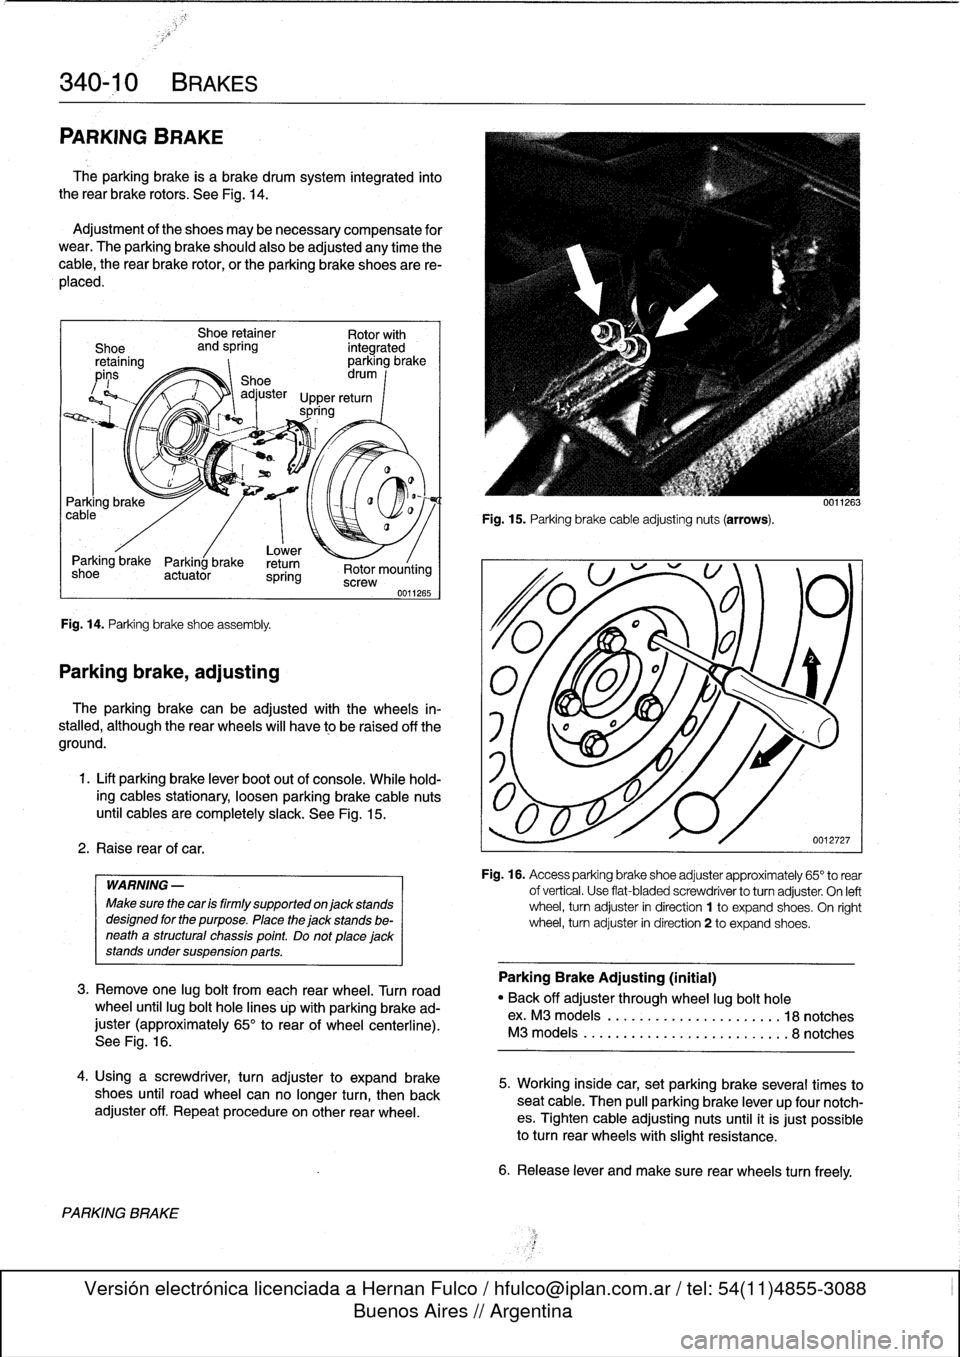 BMW 328i 1994 E36 Workshop Manual 
340-
1
0
BRAKES

PARKING
BRAKE

The
parking
brake
is
a
brake
drum
system
integrated
into
the
rear
brake
rotors
.
See
Fig
.
14
.

Adjustment
of
the
shoes
may
benecessary
compensate
for
wear
.
The
park